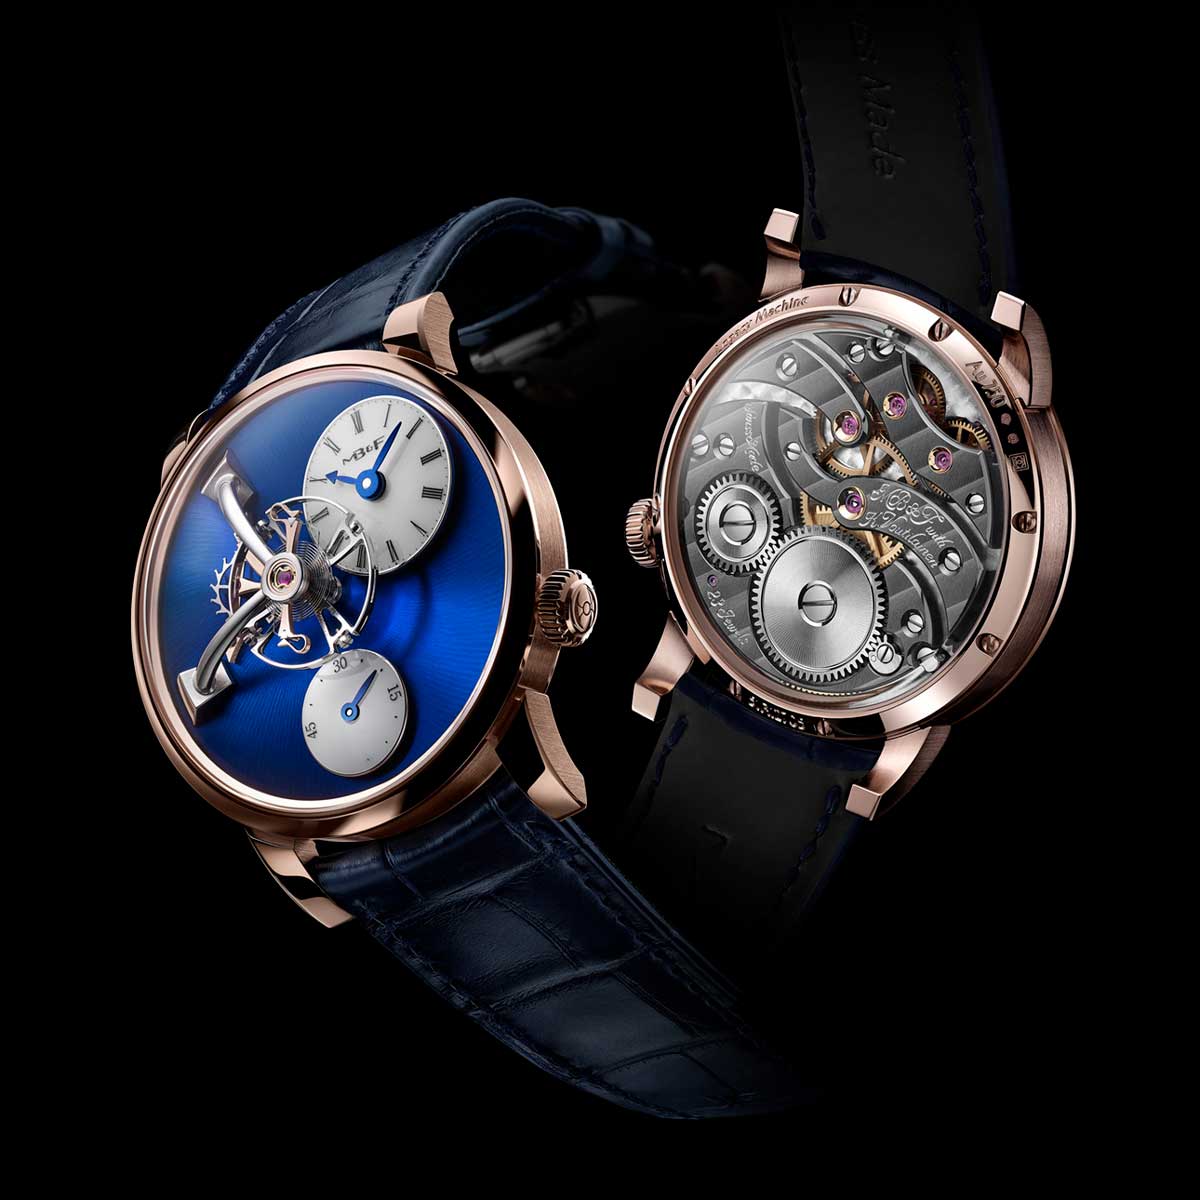 The new LM101 in 18k red gold with a royal blue dial